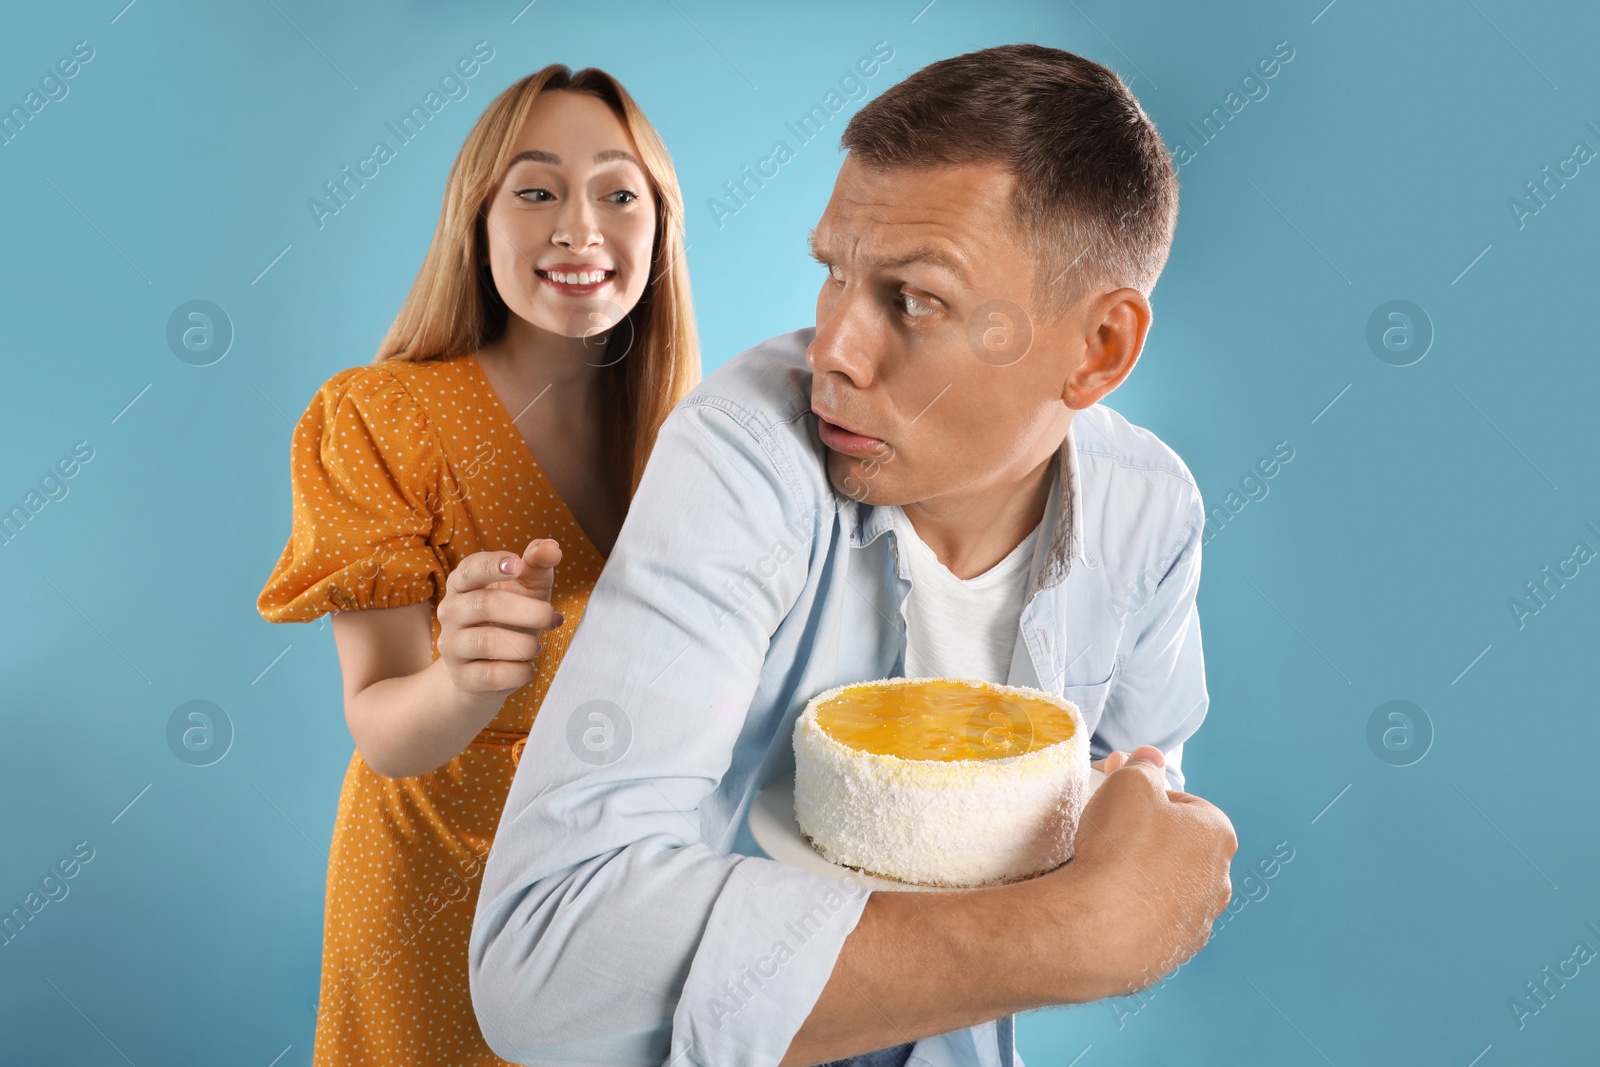 Photo of Greedy man hiding tasty cake from woman on turquoise background